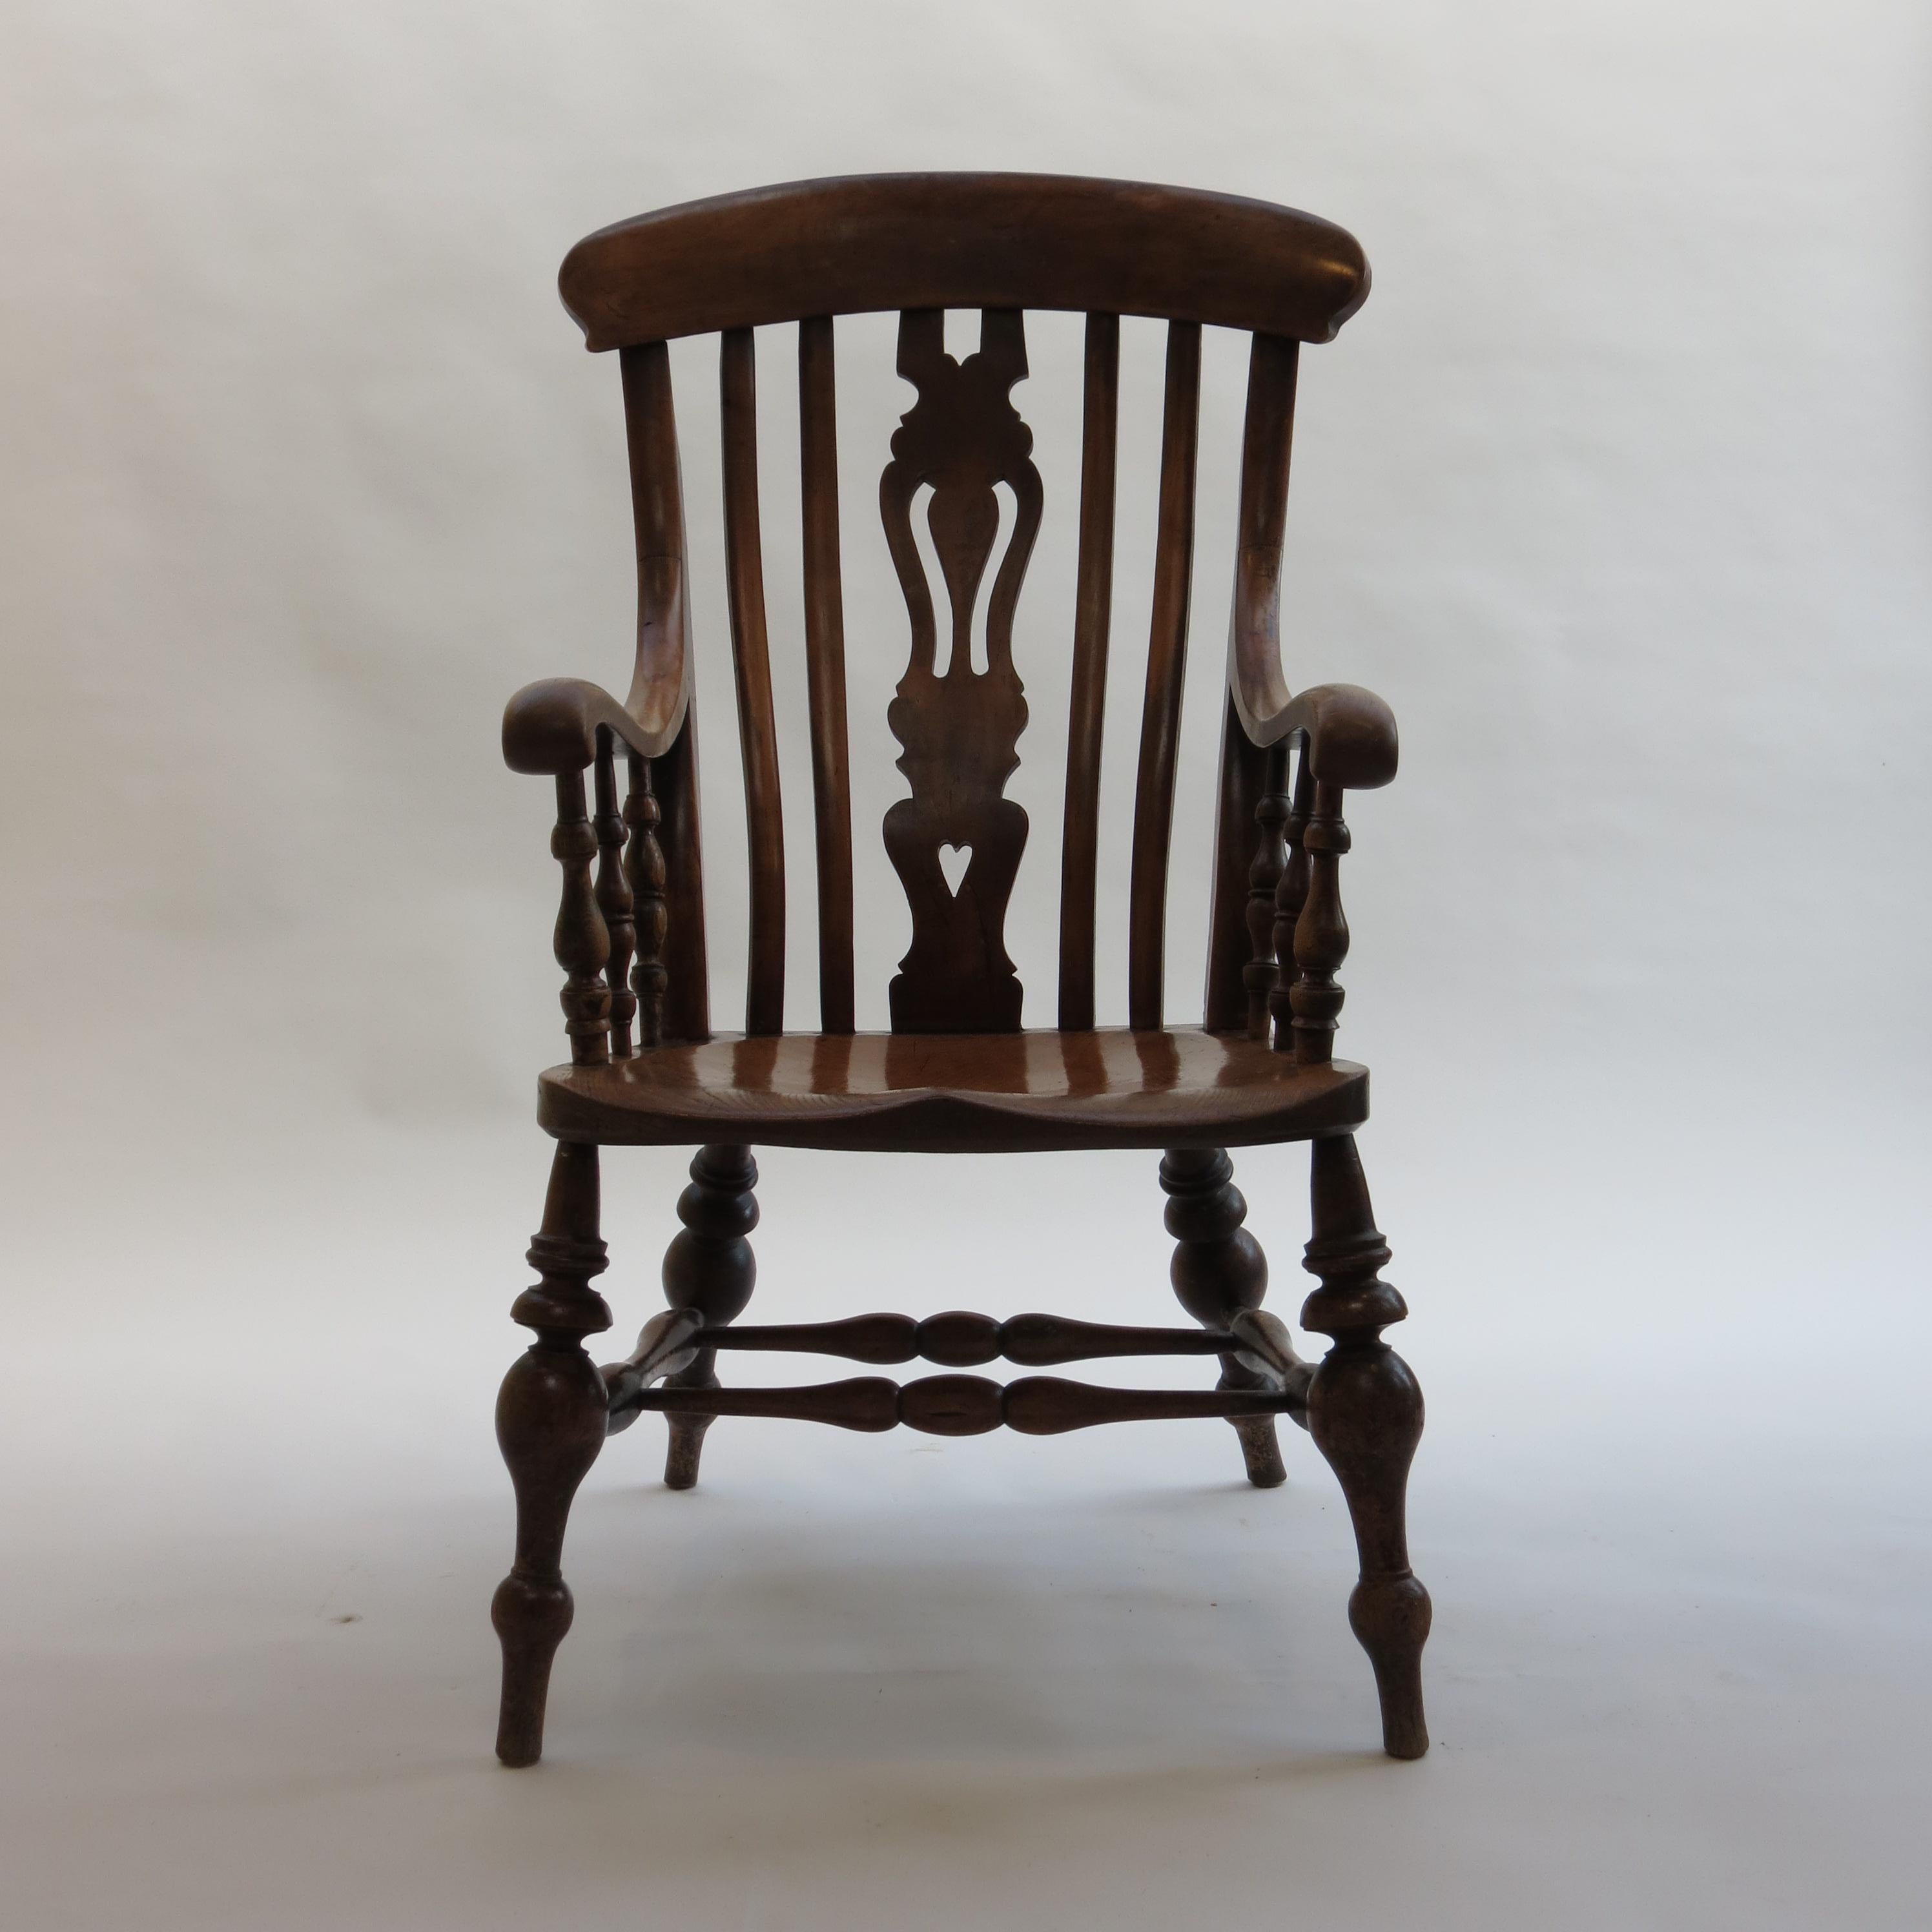 Rustic Antique Extra Large Ash and Sycamore English Windsor Country Chair 19th Century 